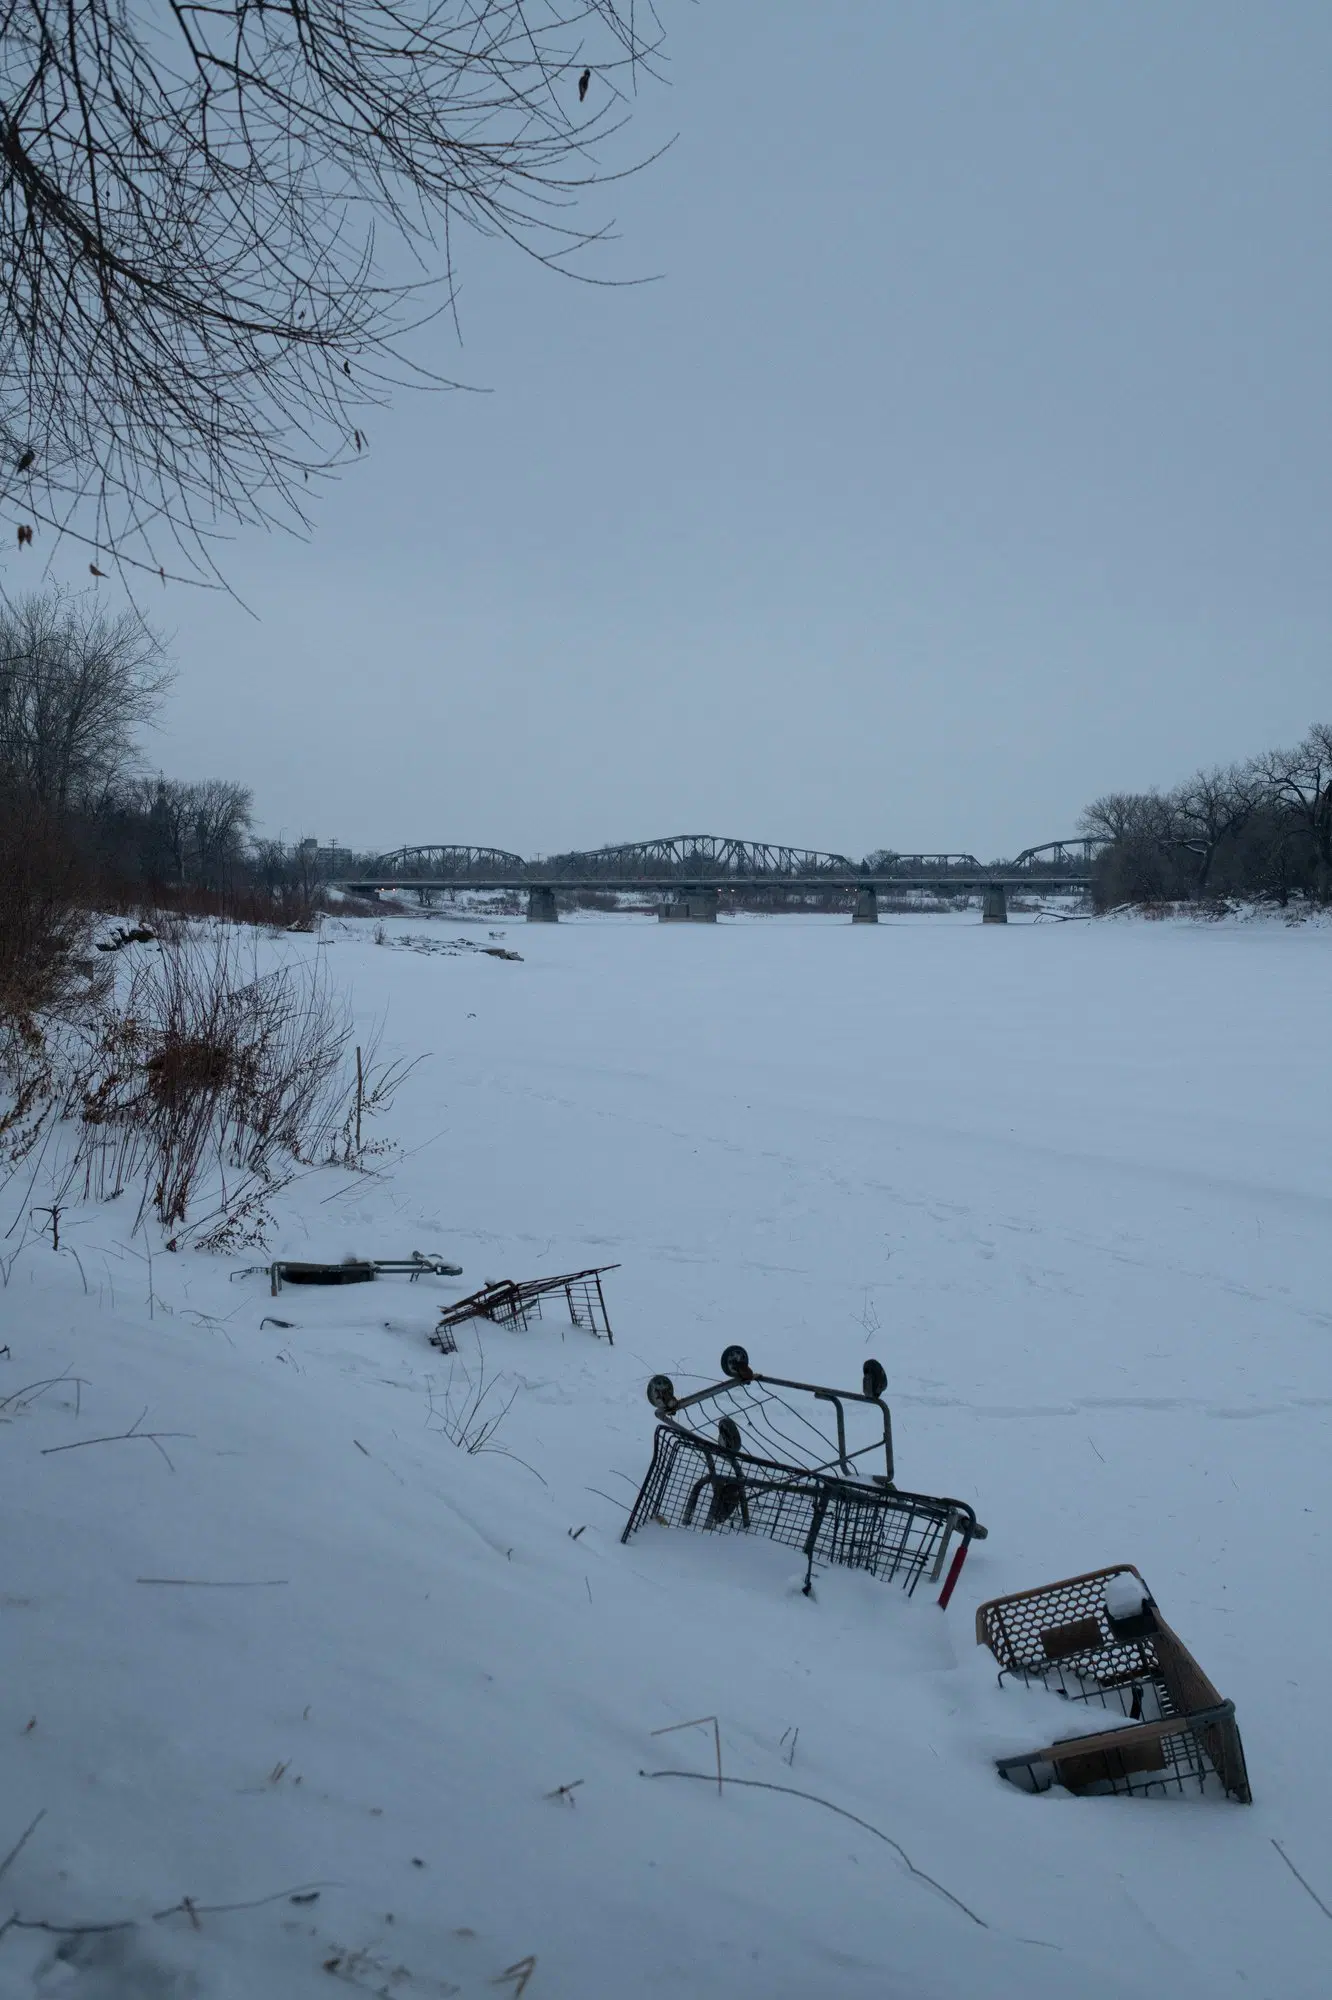 A picture of a frozen river with a bridge in the distance.